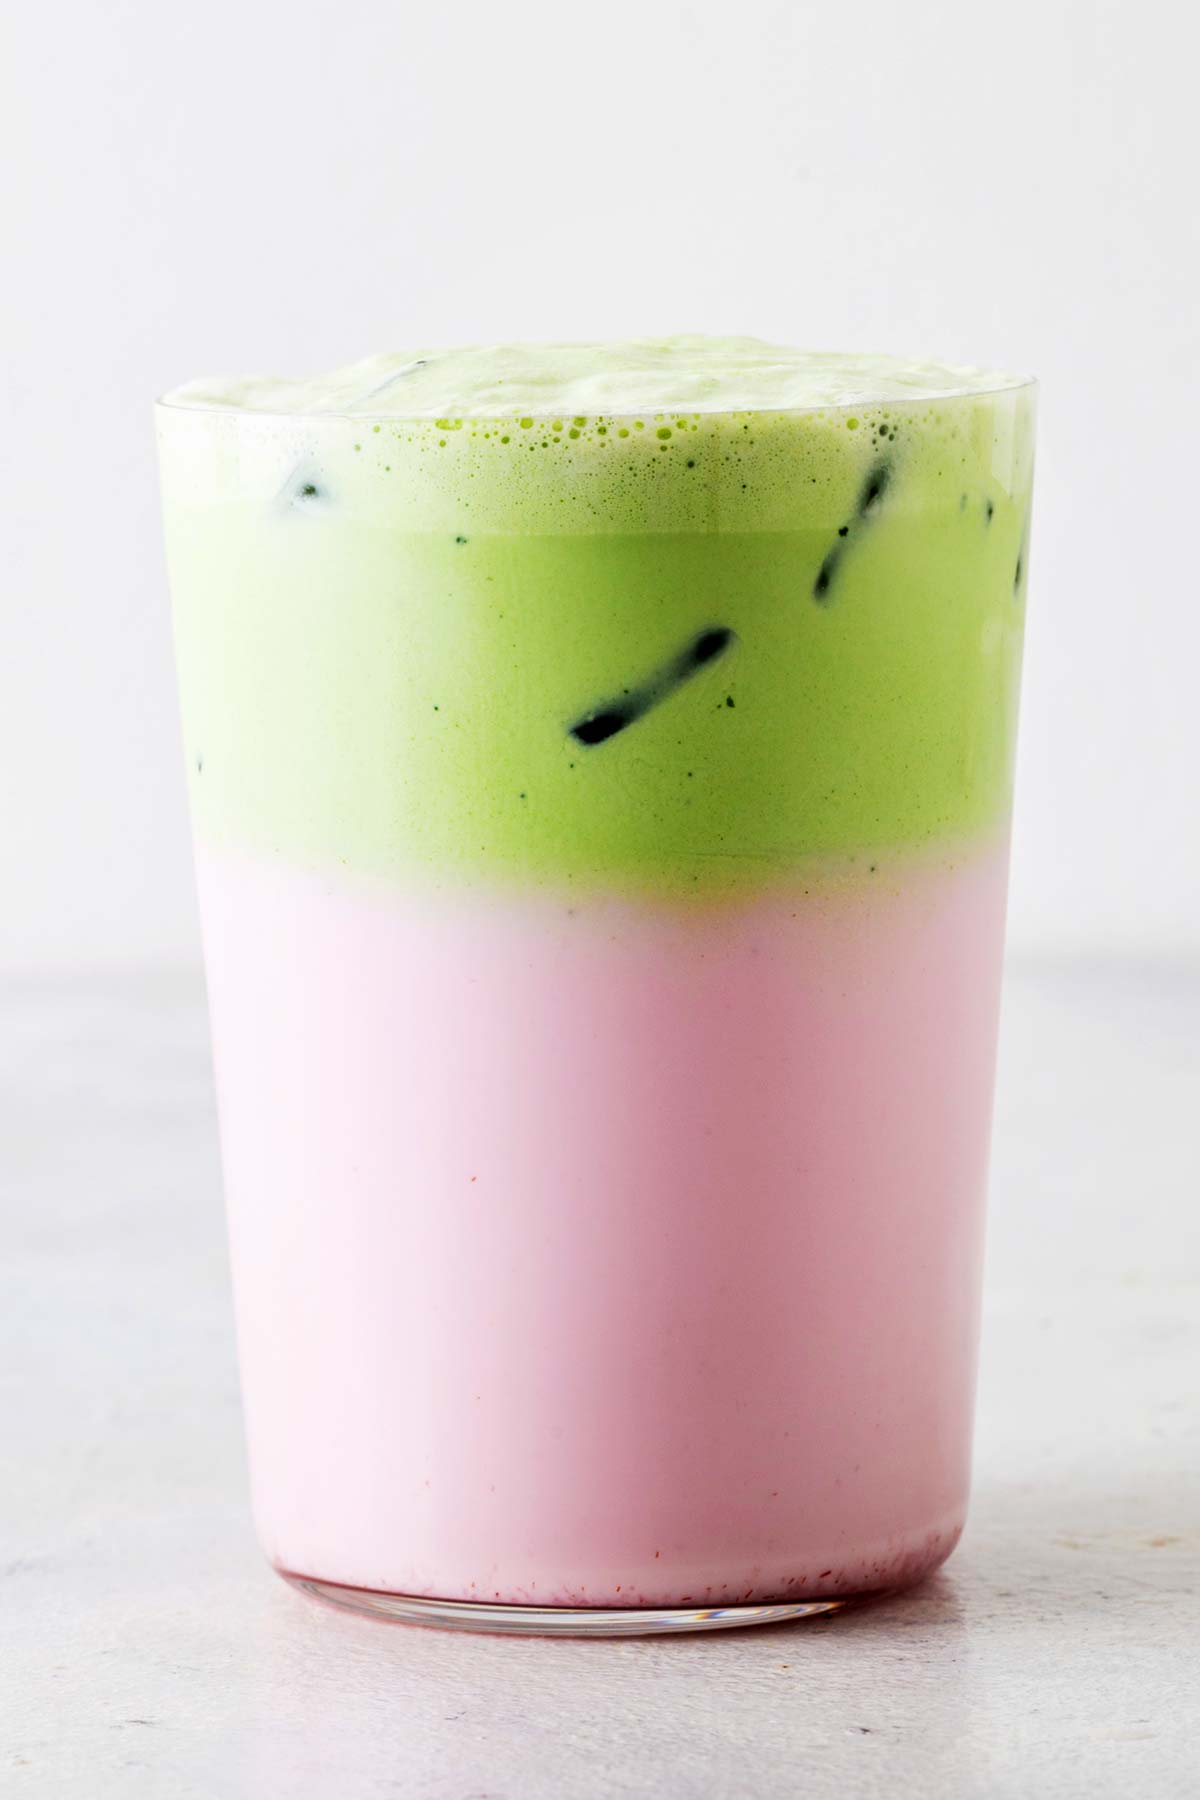 Easy matcha cold foam already poured over a pink iced latte in a clear glass.